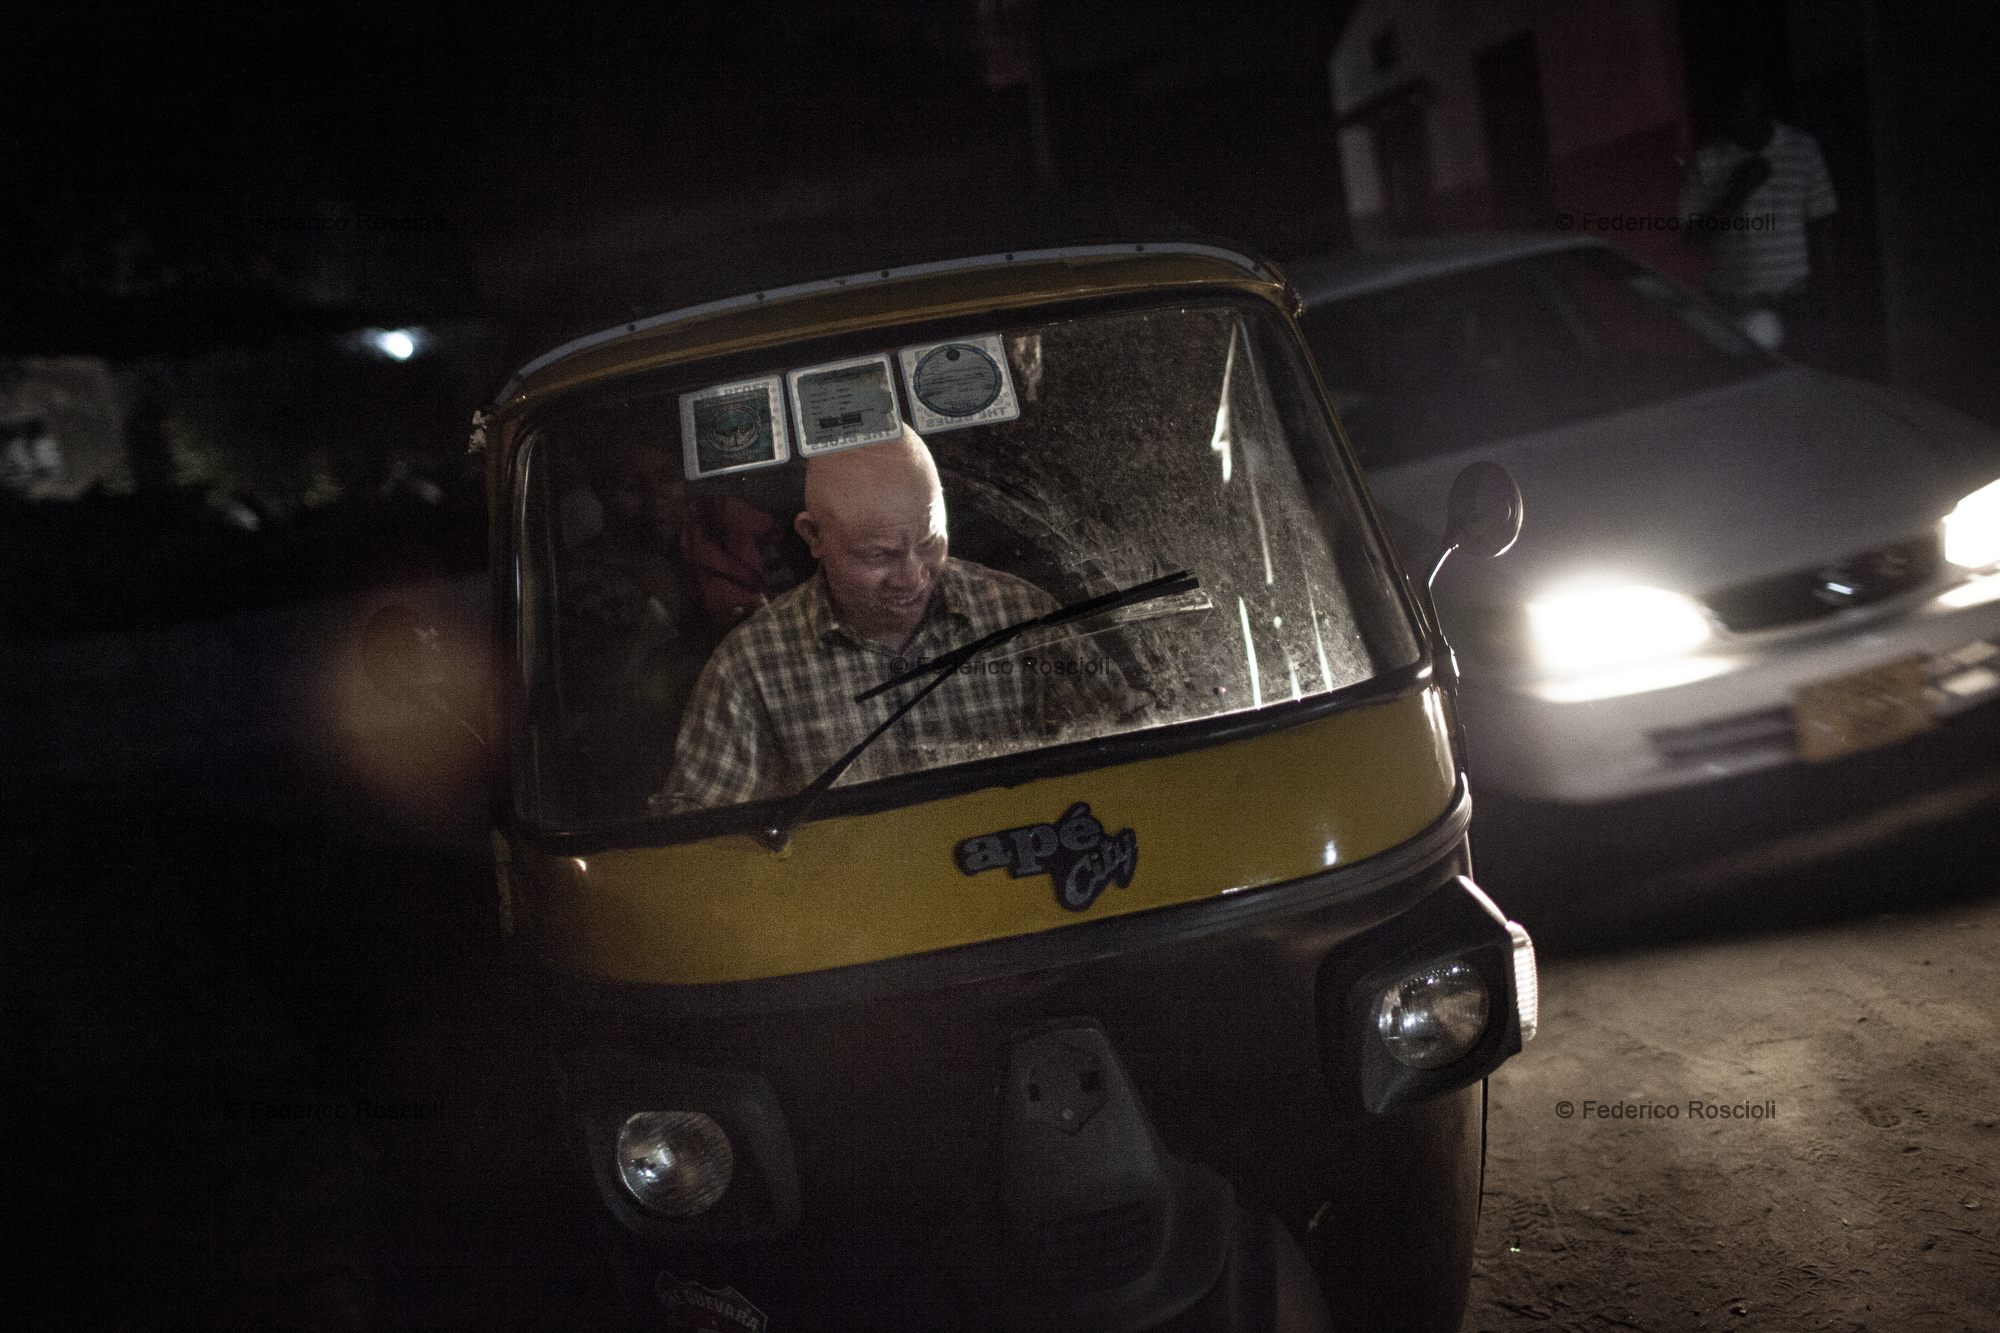 Dar es Salaam, Tanzania, July 29, 2014 - Redman driving his bajaj in Dar es Salaam, Tanzania. Despite albinism, he has been a driver for 9 years, the last 3 on a bajaj. A Bajaj is a three-wheel taxi, perfect to move in Dar traffic. Being covered on the top, it is also a shield from the sun for an albino. Redman also has to fight against discrimination to be able to work. He has to pay a person to pick up the bajaj from the owner every day, as the owner does not want albino drivers, not trusting their sight.